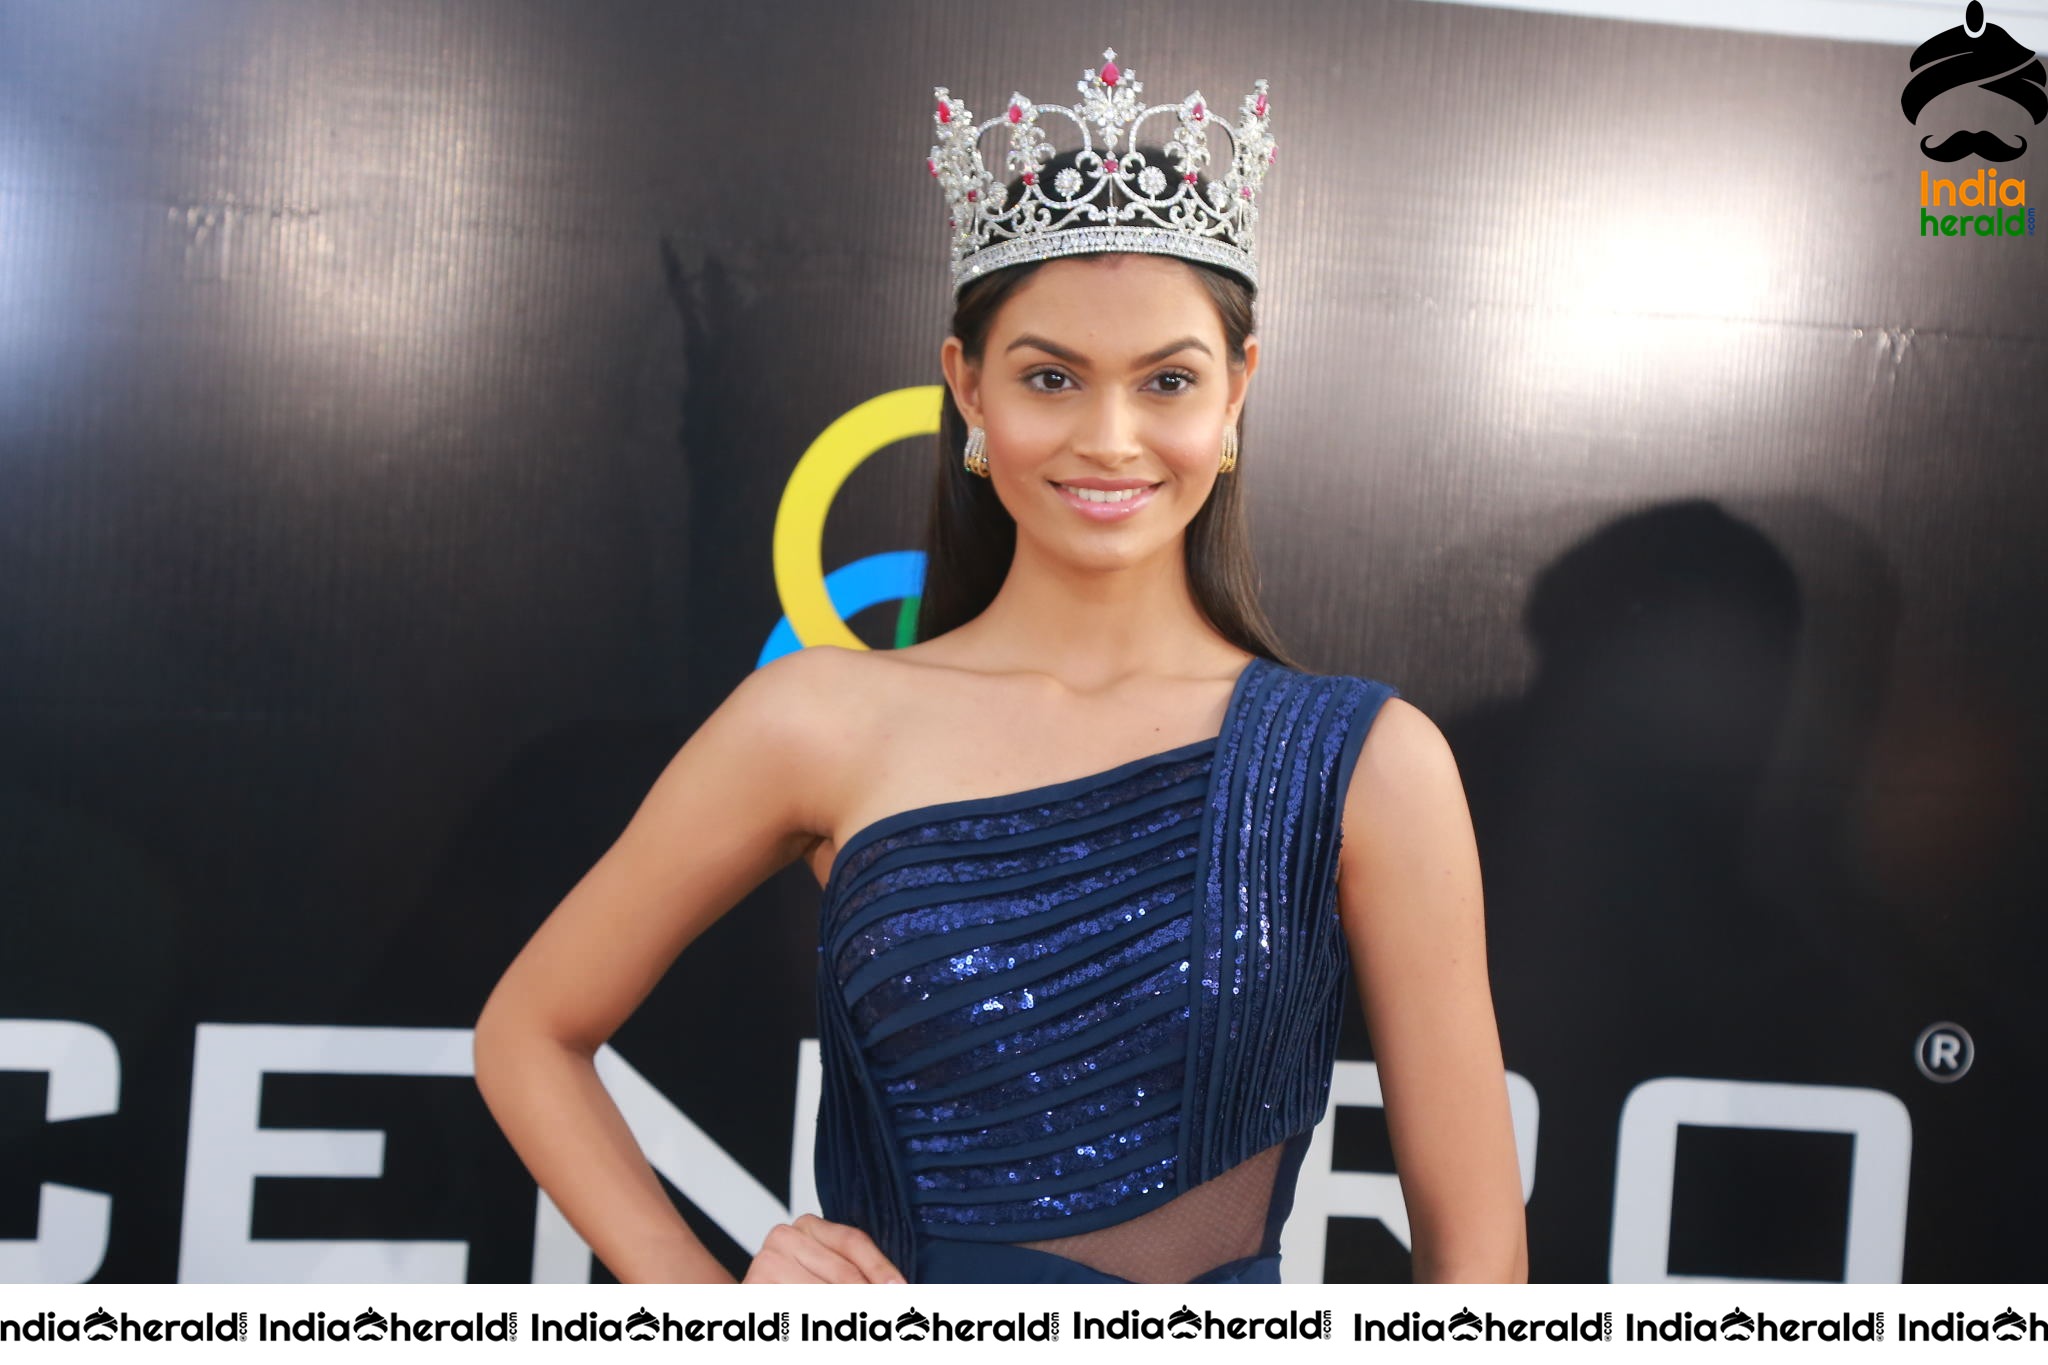 Miss India 2019 Suman Rao Winner Unveiled Wedding And Festive Footwear Collection At Centro Set 3